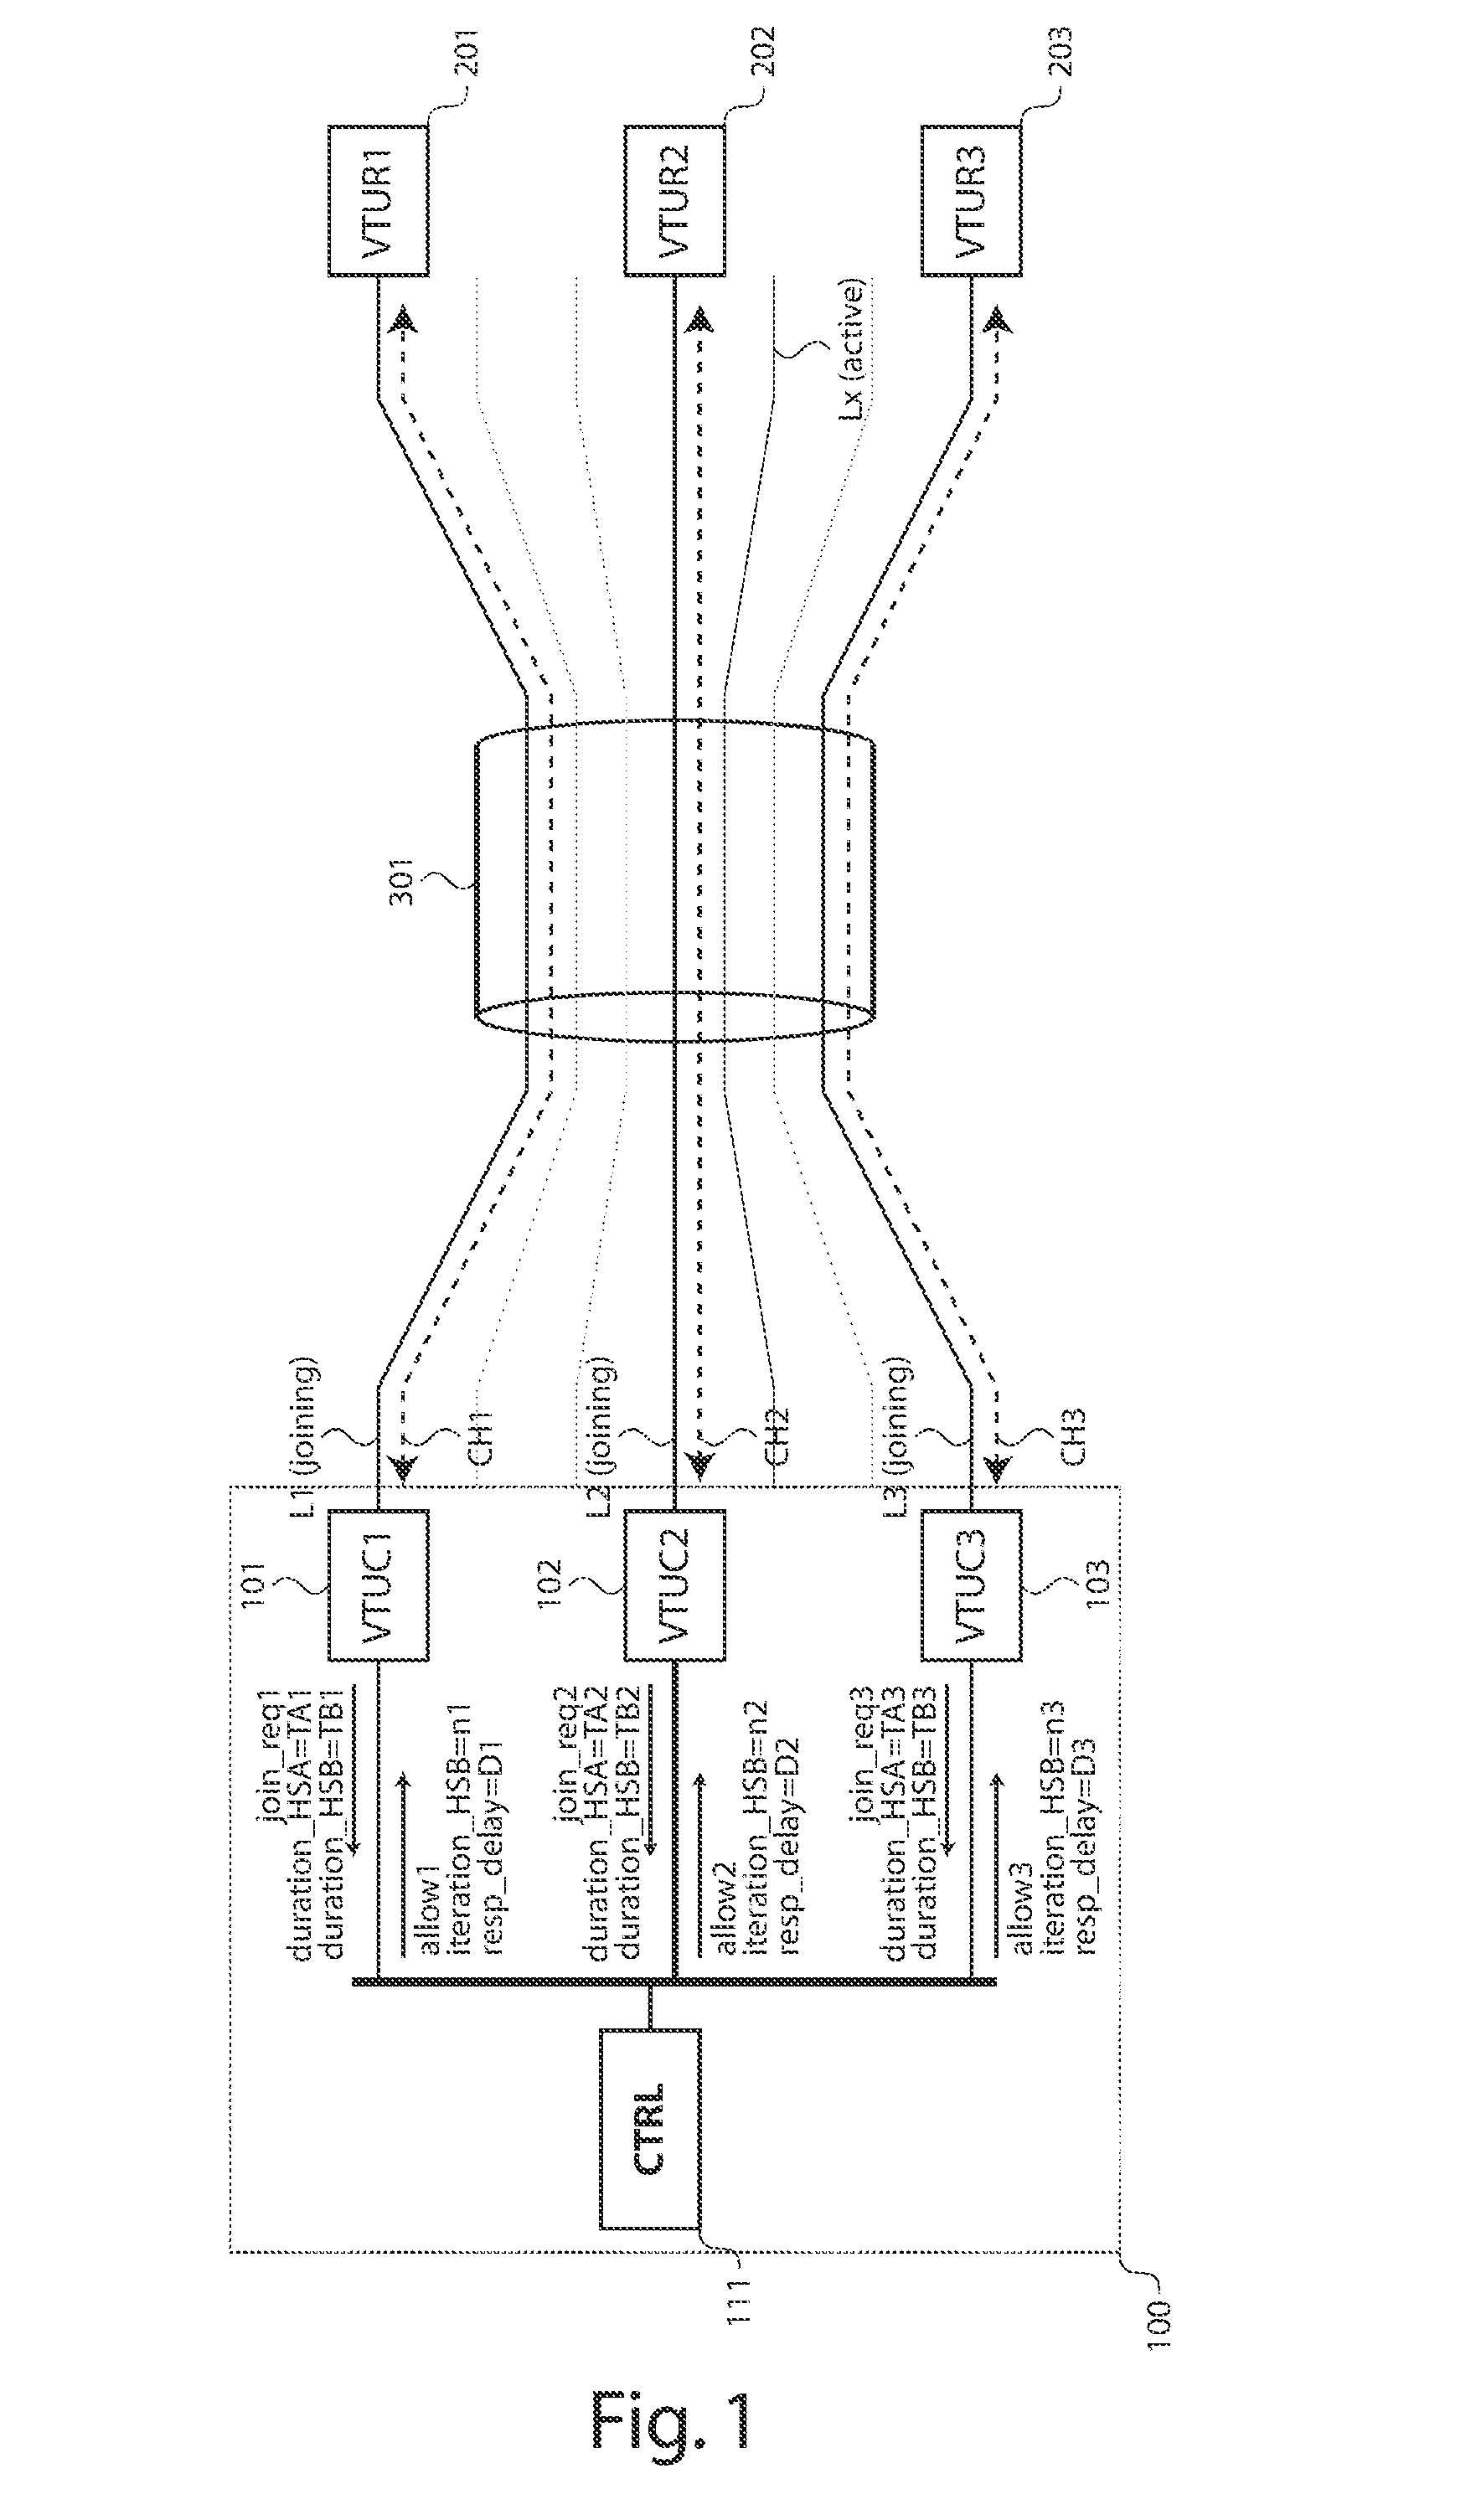 Time-alignment of crosstalk acquisition phases between multiple joining lines